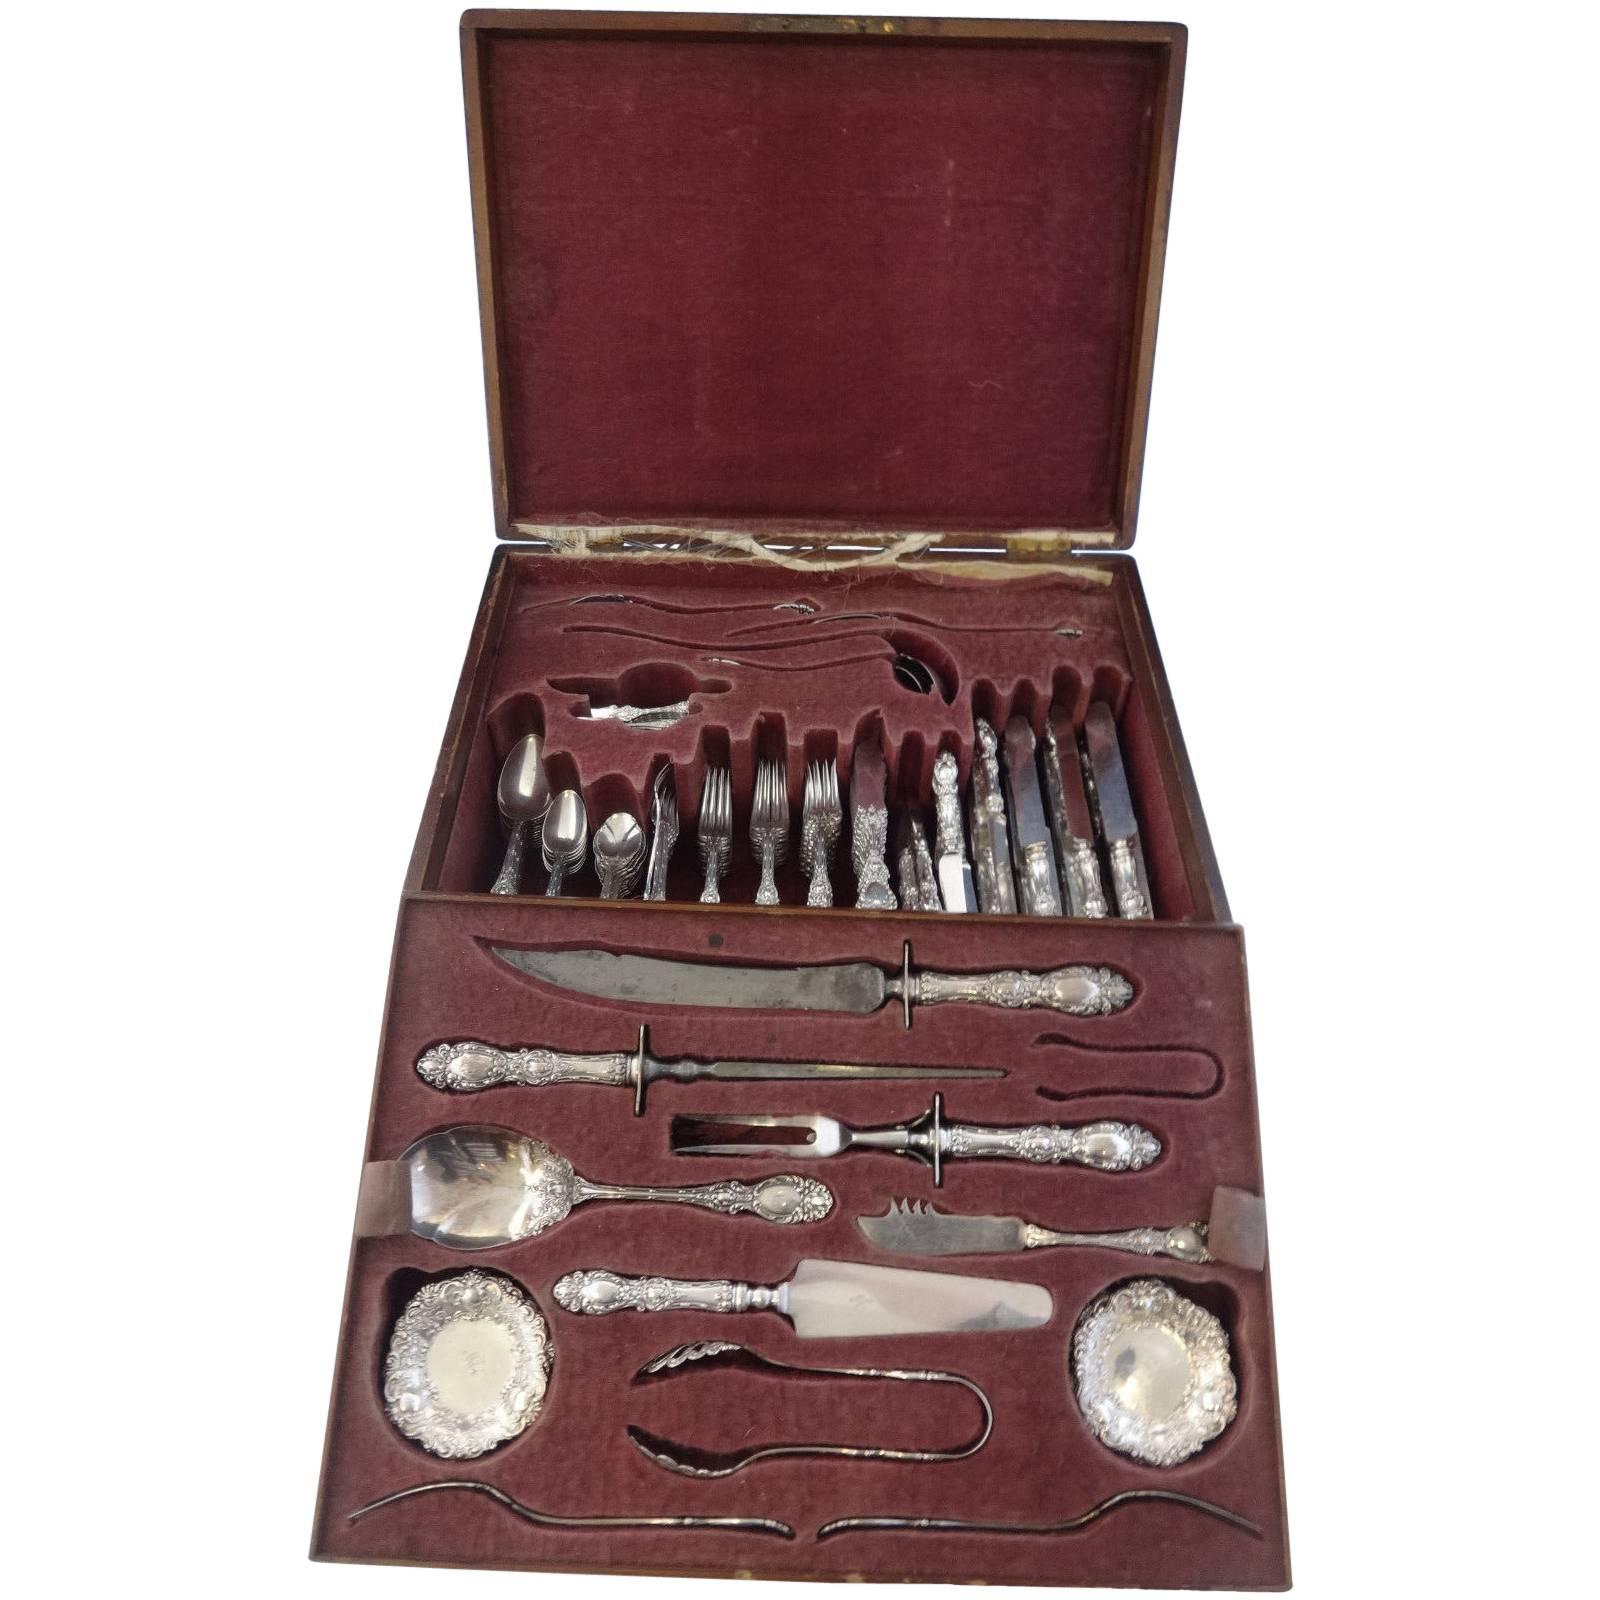 Exceptional monumental Lucerne by Wallace sterling silver dinner size flatware set, 205 pieces in original fitted box. This set includes:

12 dinner size knives, 9 5/8